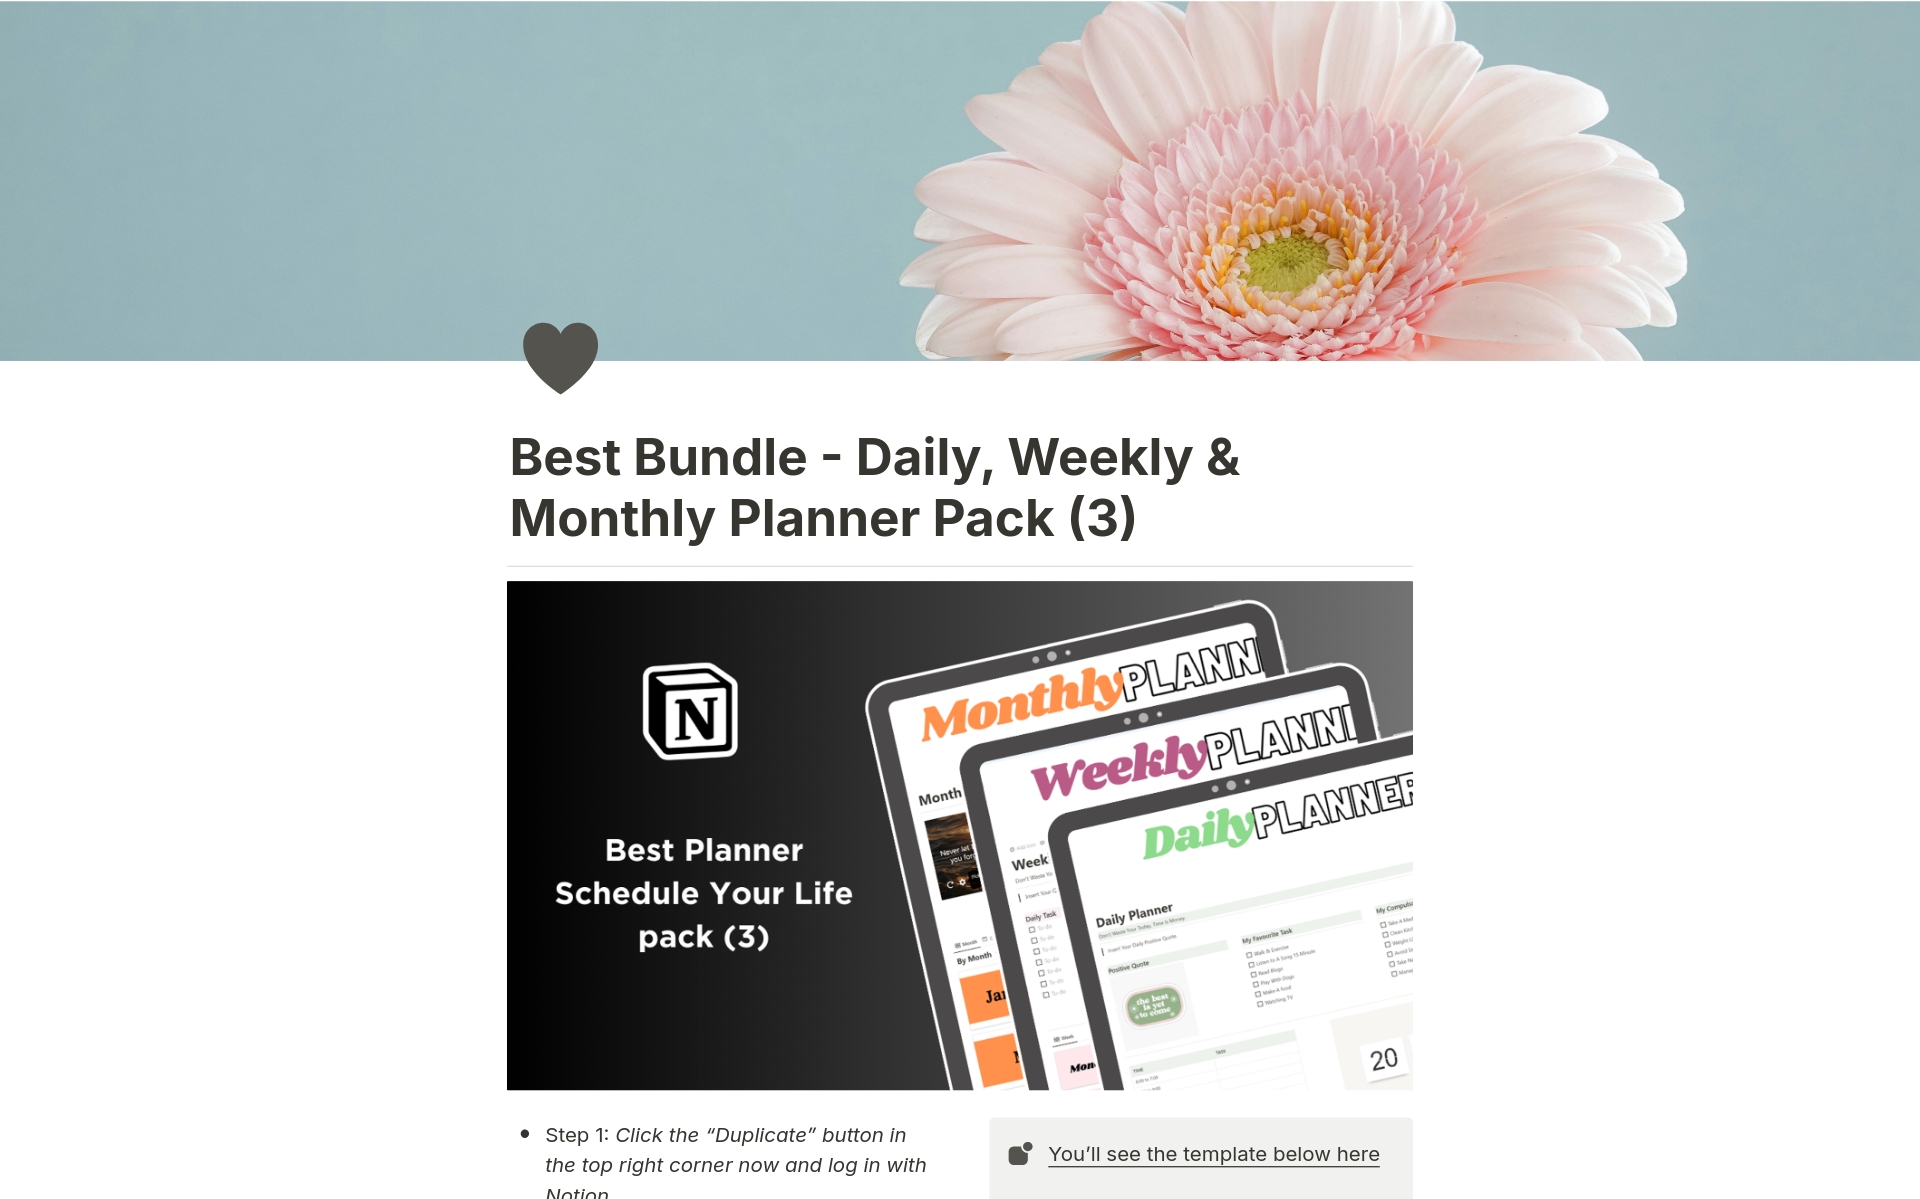 Plan your day, week, and month in Notion

These digital planners are designed to help you map out your days, weeks, and months so that you can make the most of your time.